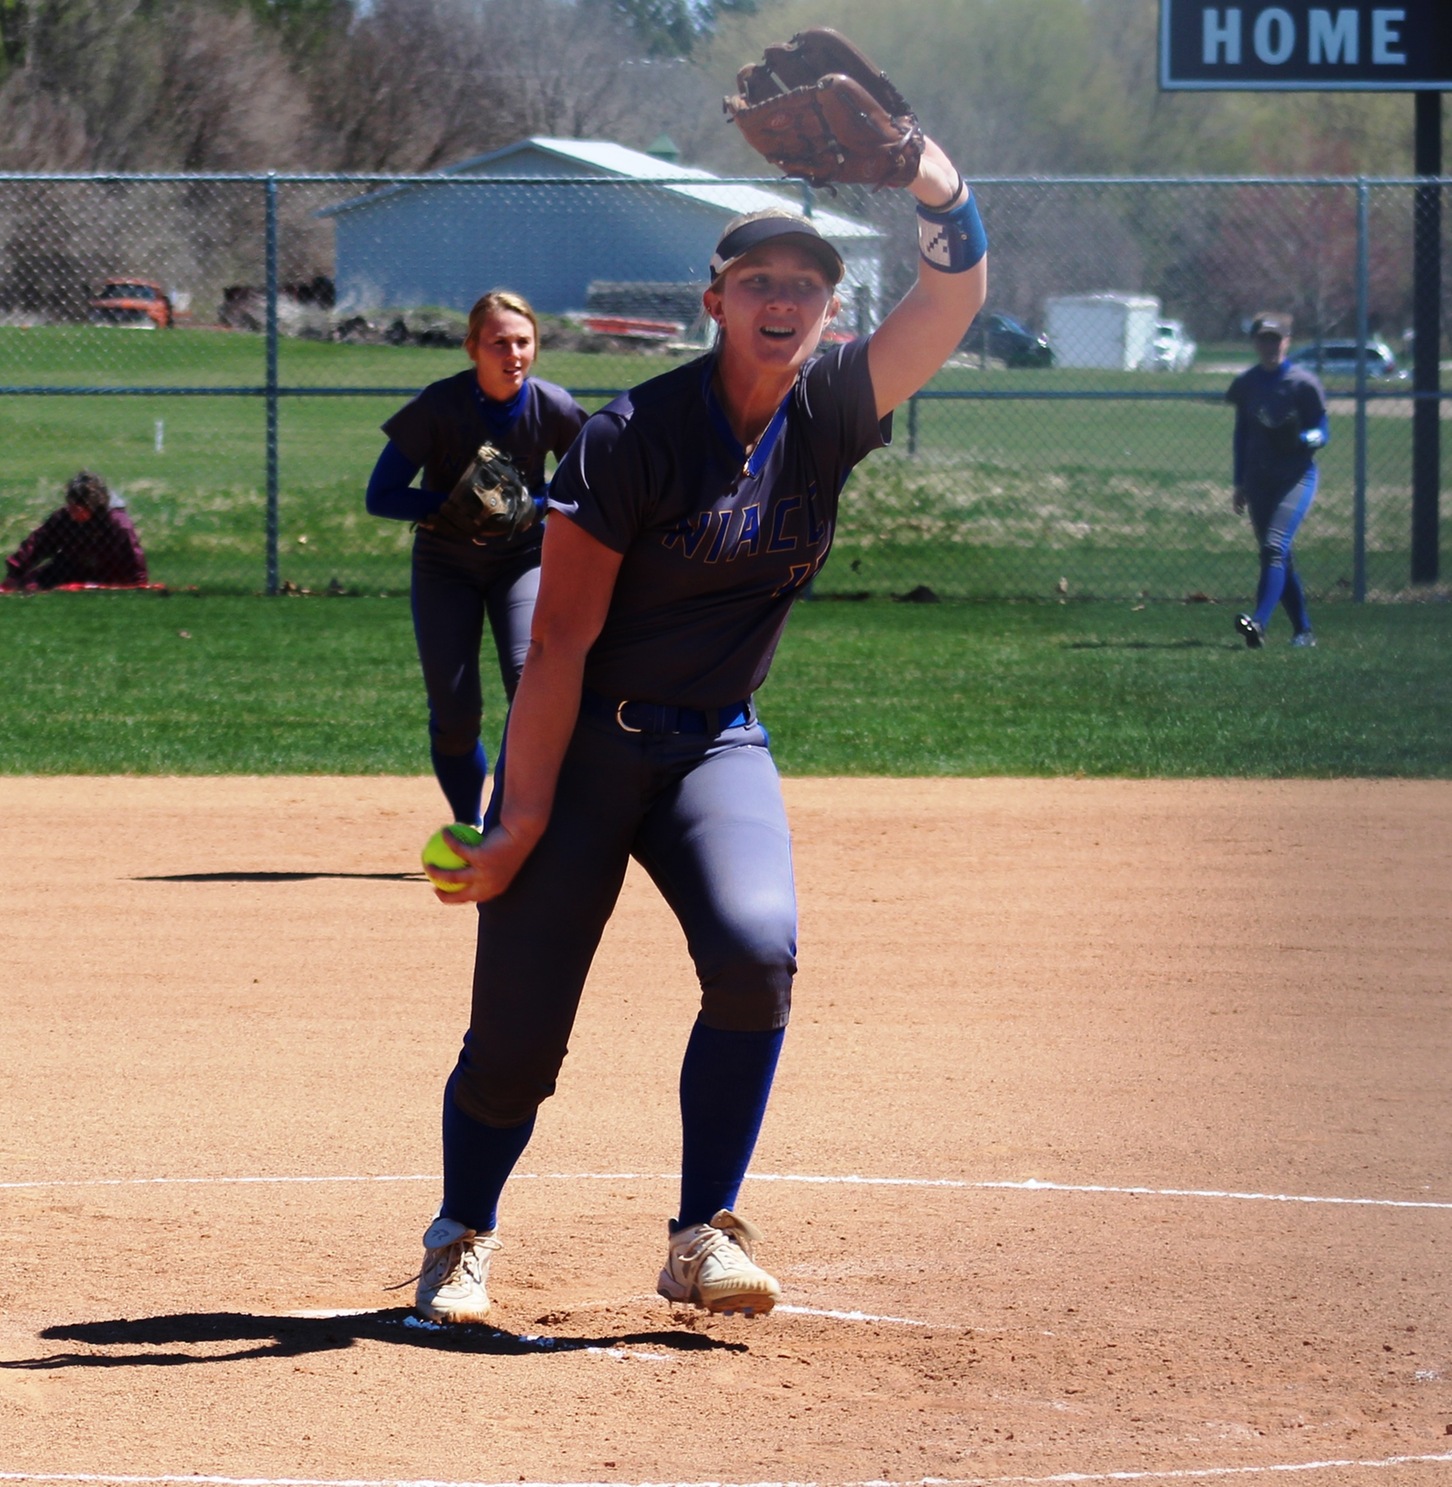 NIACC's Kristen Peka delivers a pitch in game at DMACC earlier this season.